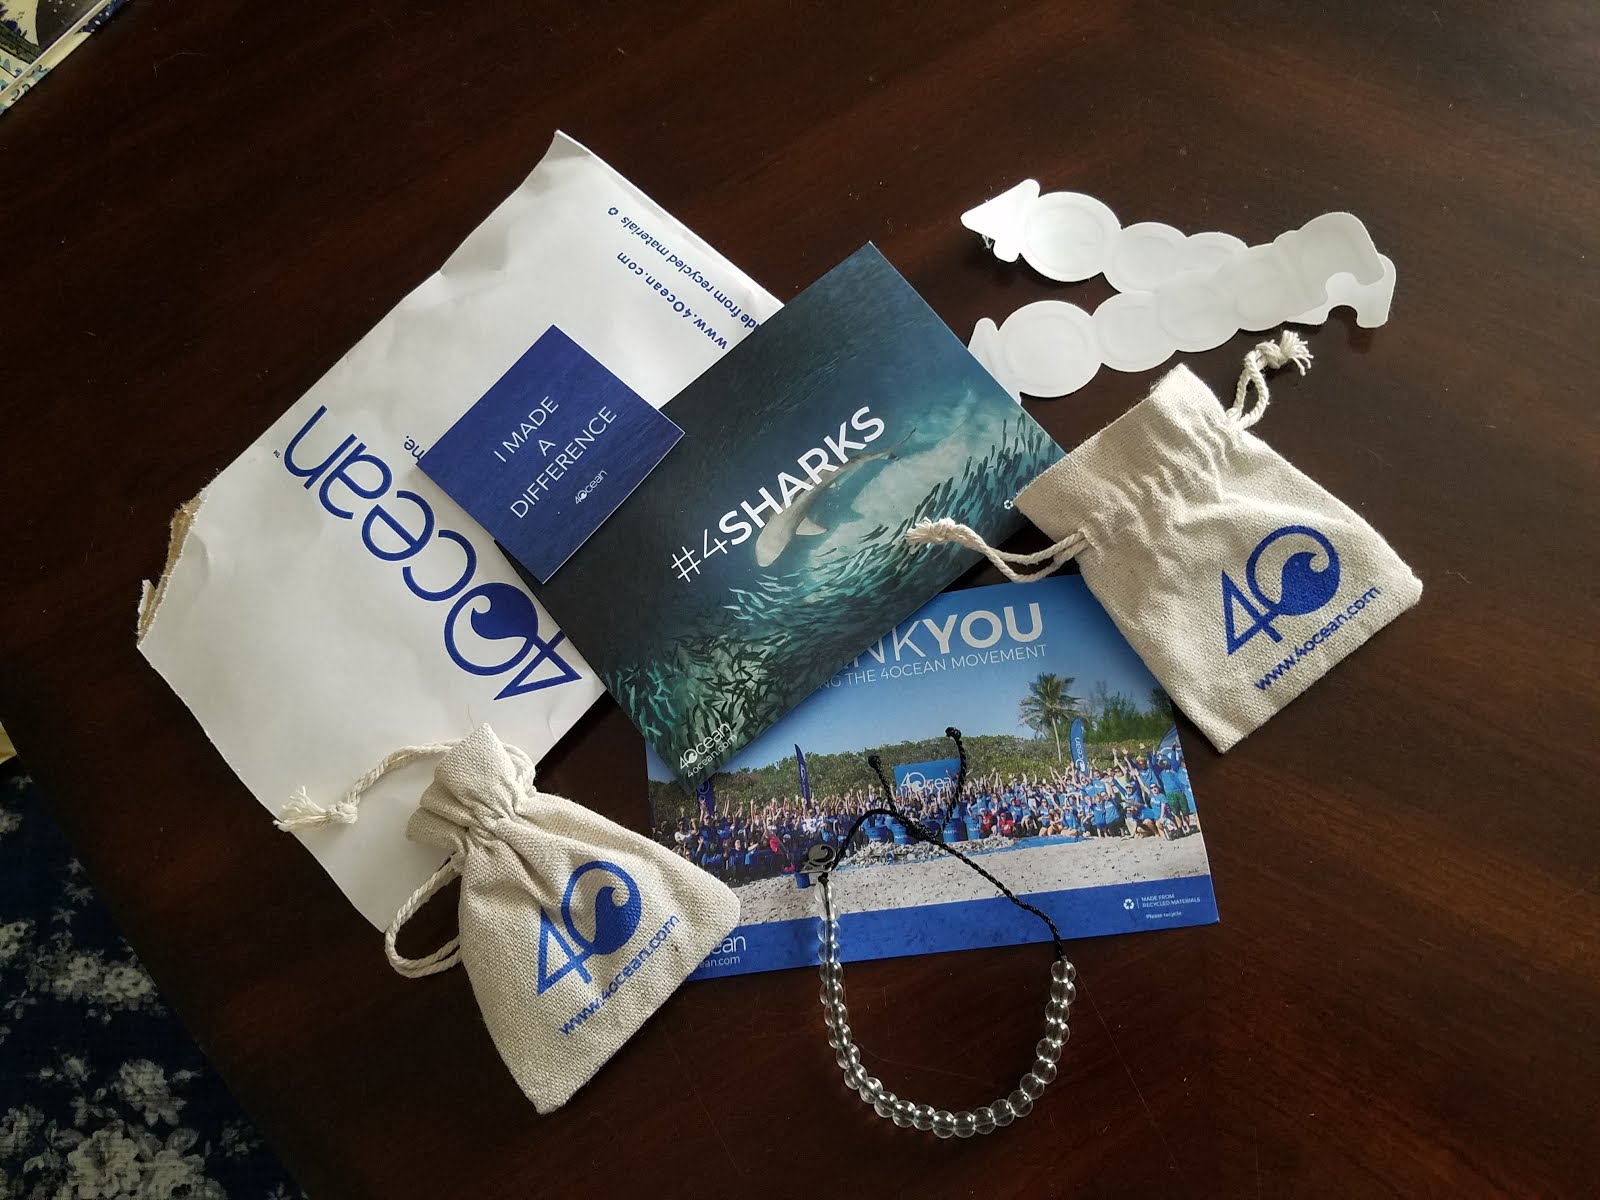 4Ocean Bracelets Review - Must Read This Before Buying